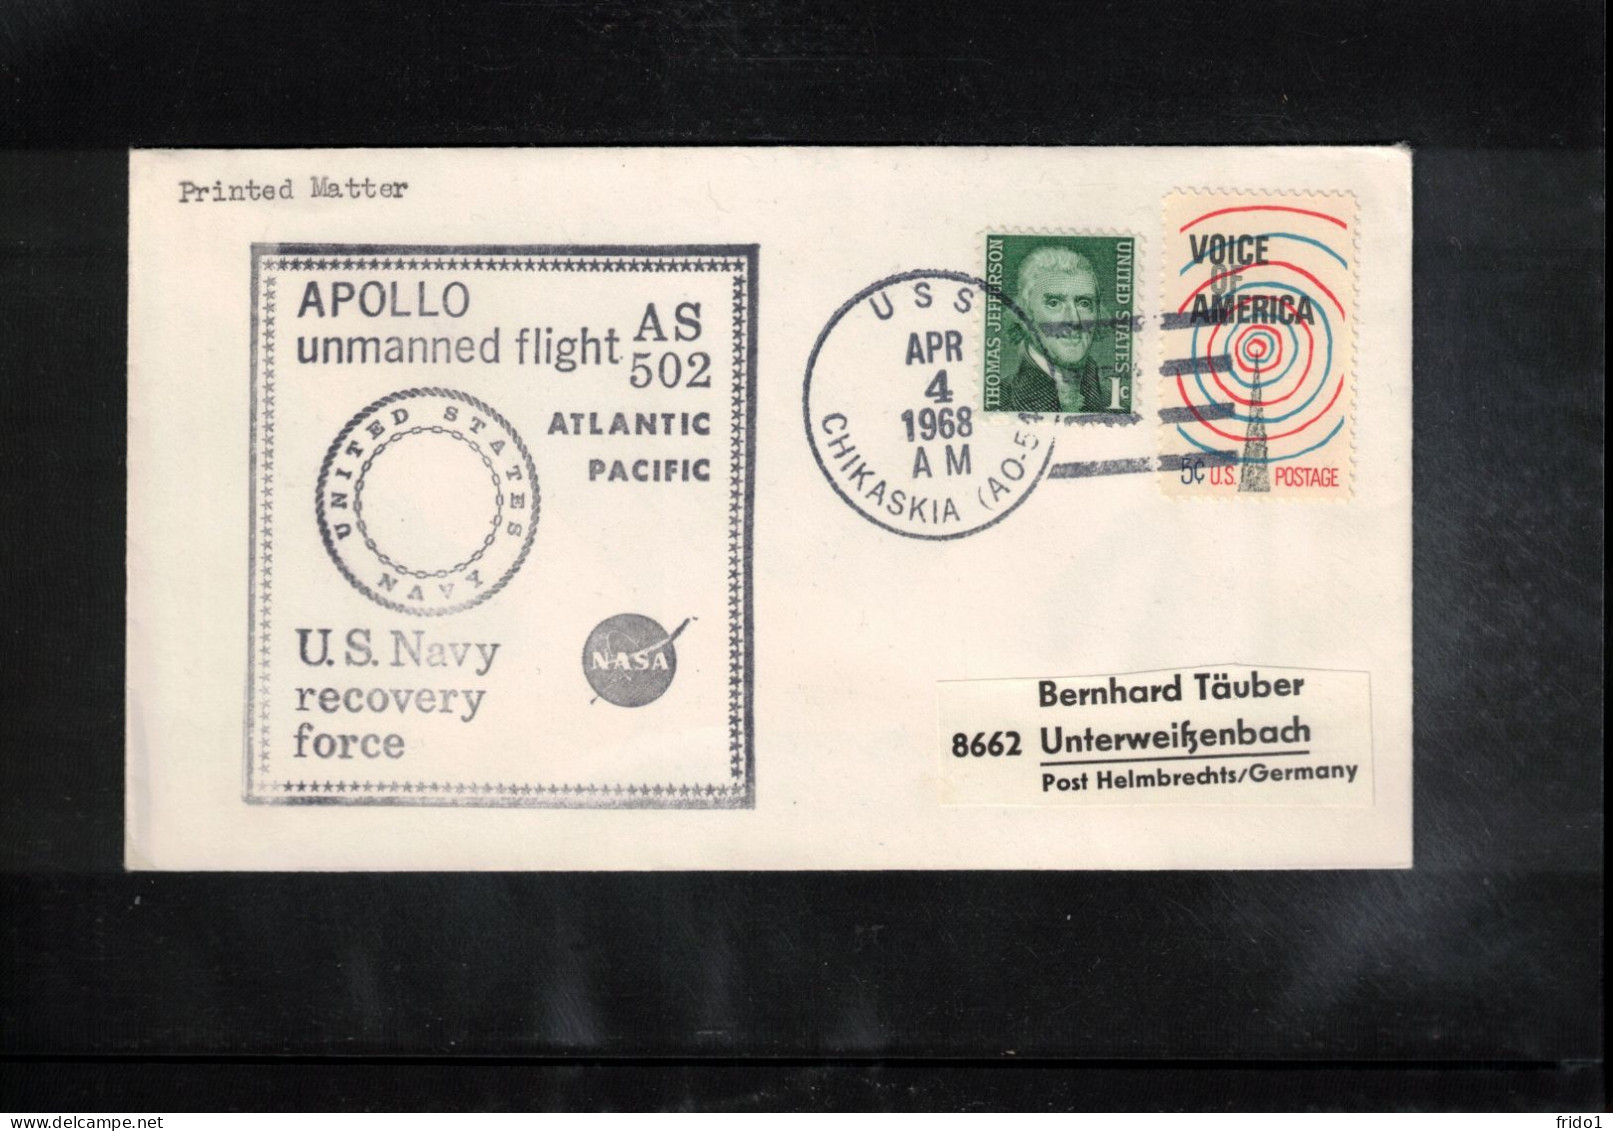 USA 1968 Space / Weltraum Apollo Unmanned Flight AS 502 - US Navy Recovery Force Ship USS Chikaskia Interesting Cover - United States